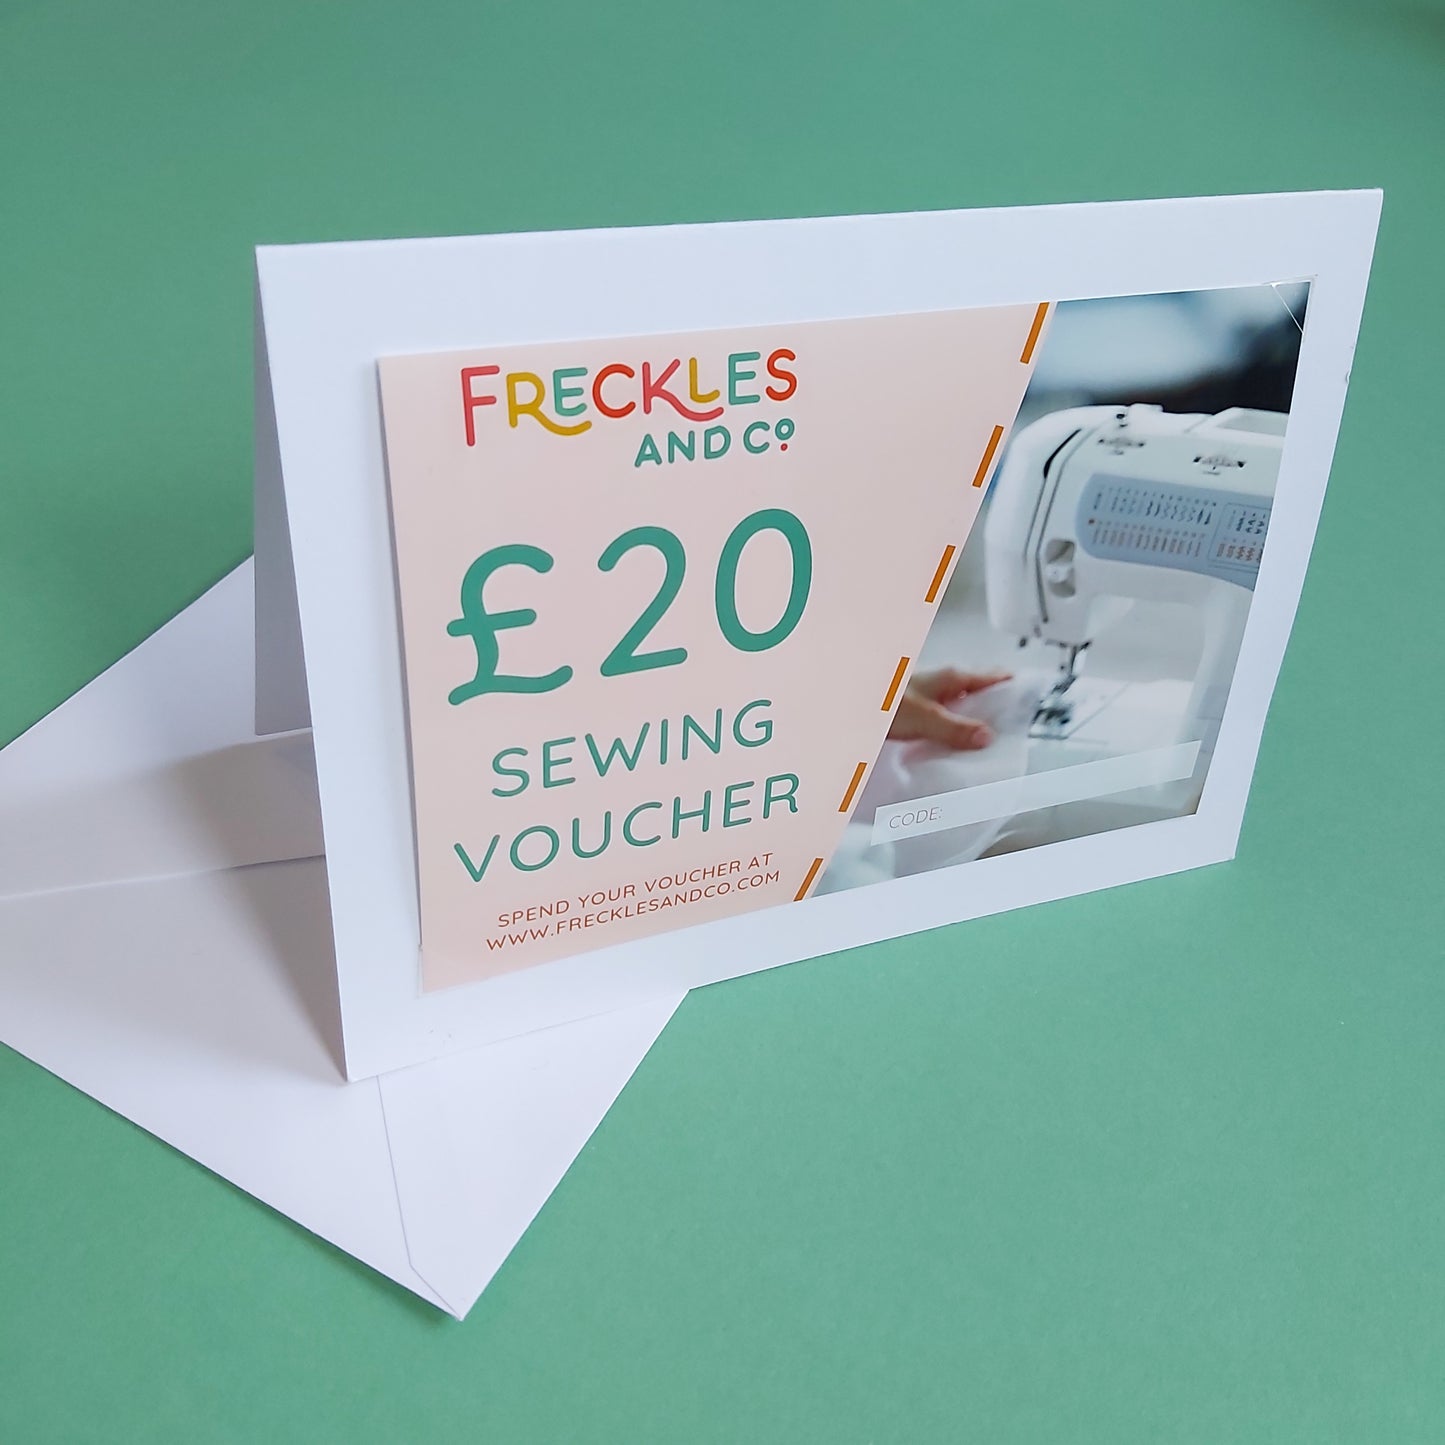 Freckles and Co Sewing Voucher